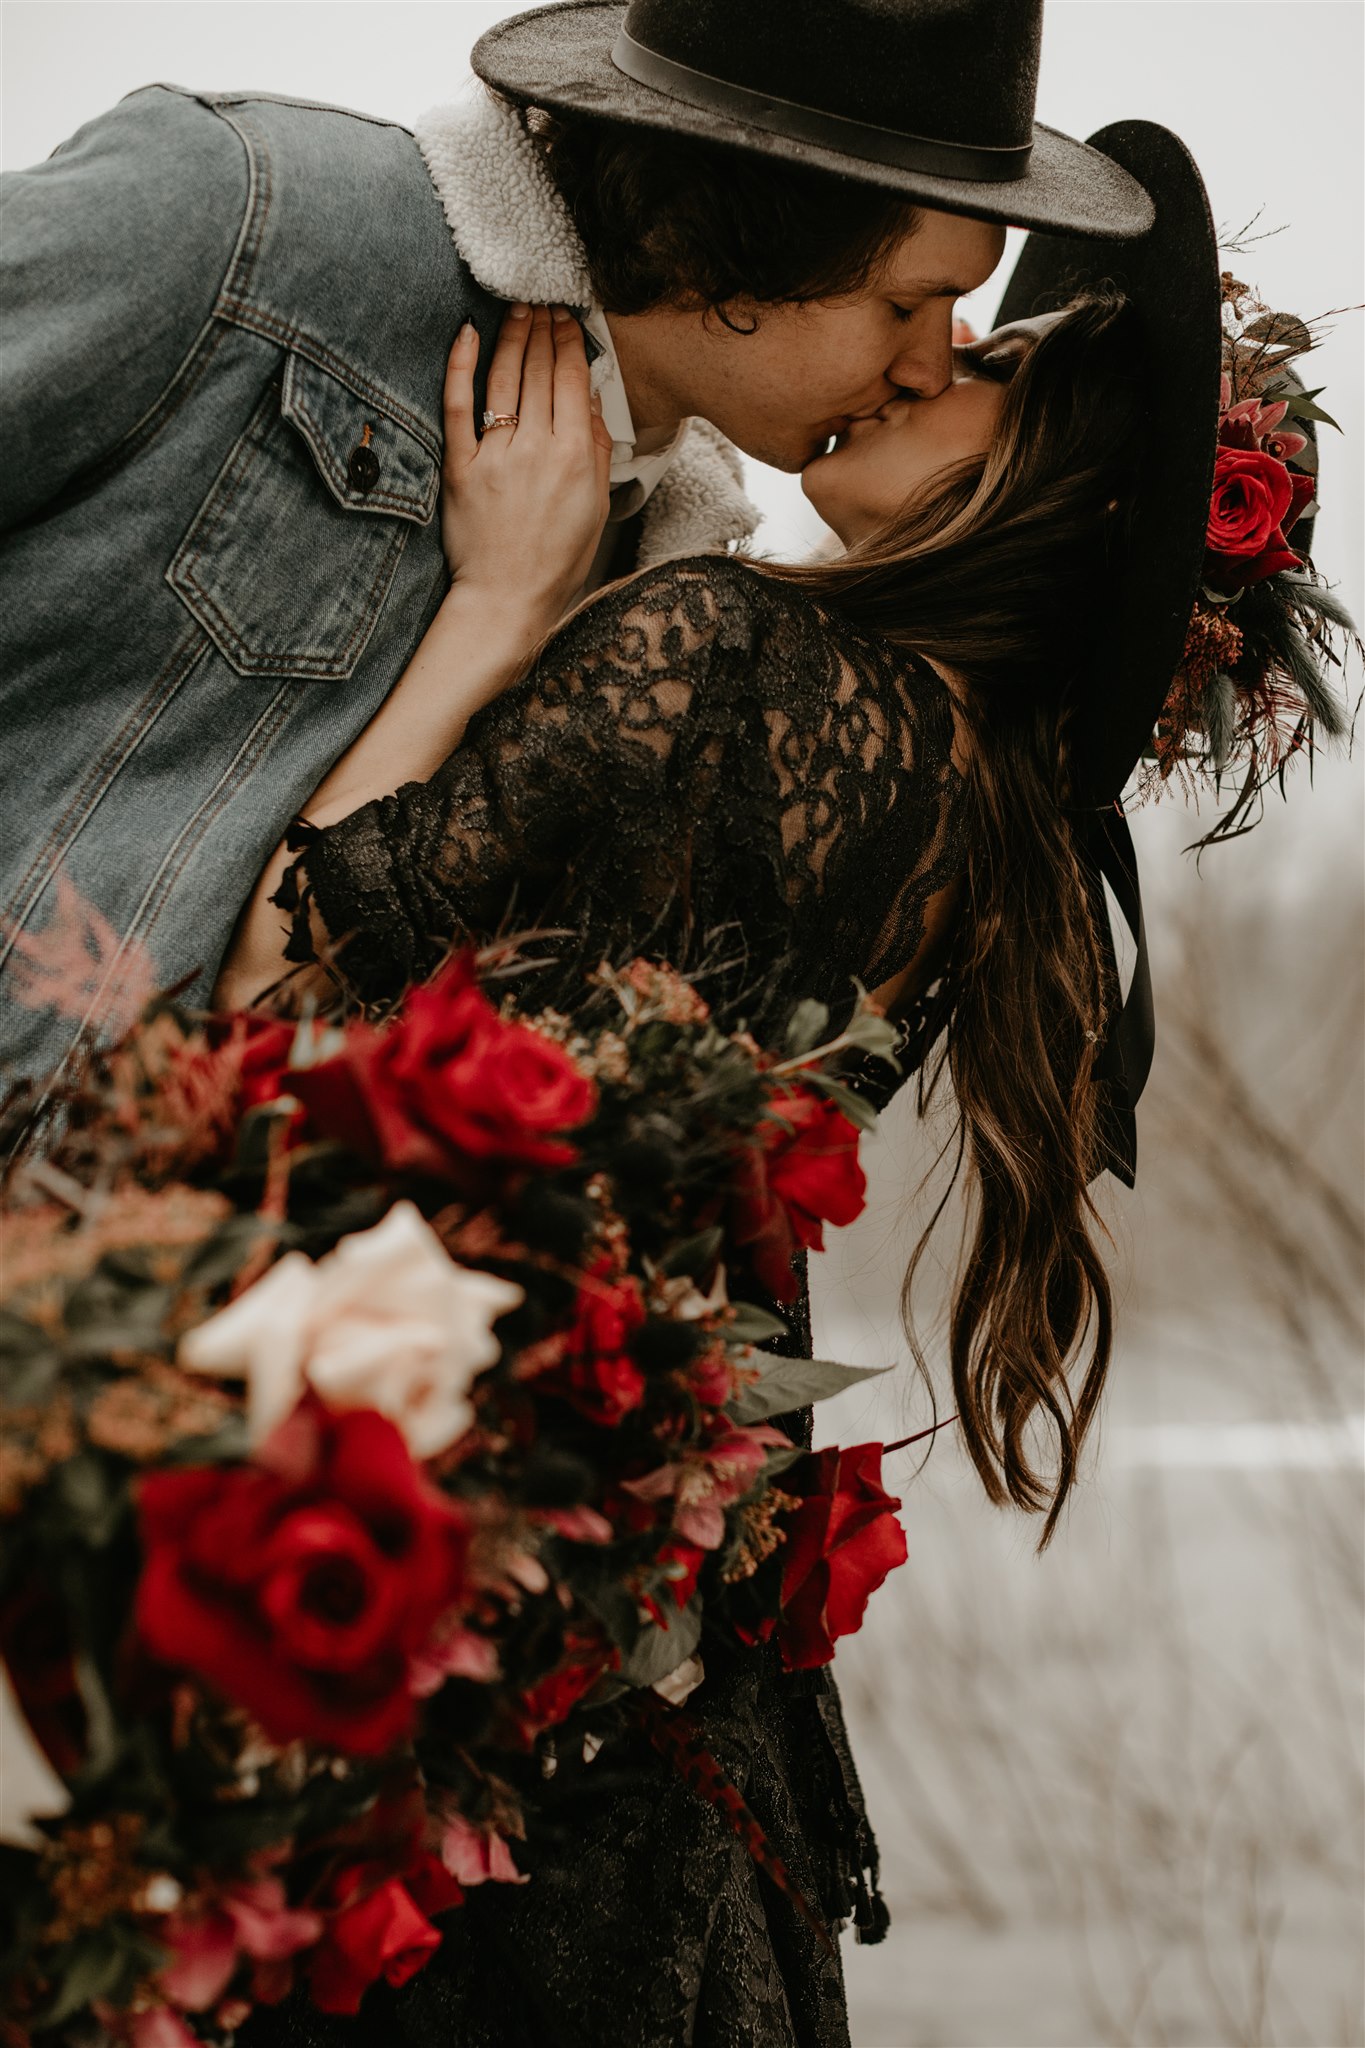 Boho bride in black wedding dress with red wedding bouquet being dipped and kissed by groom